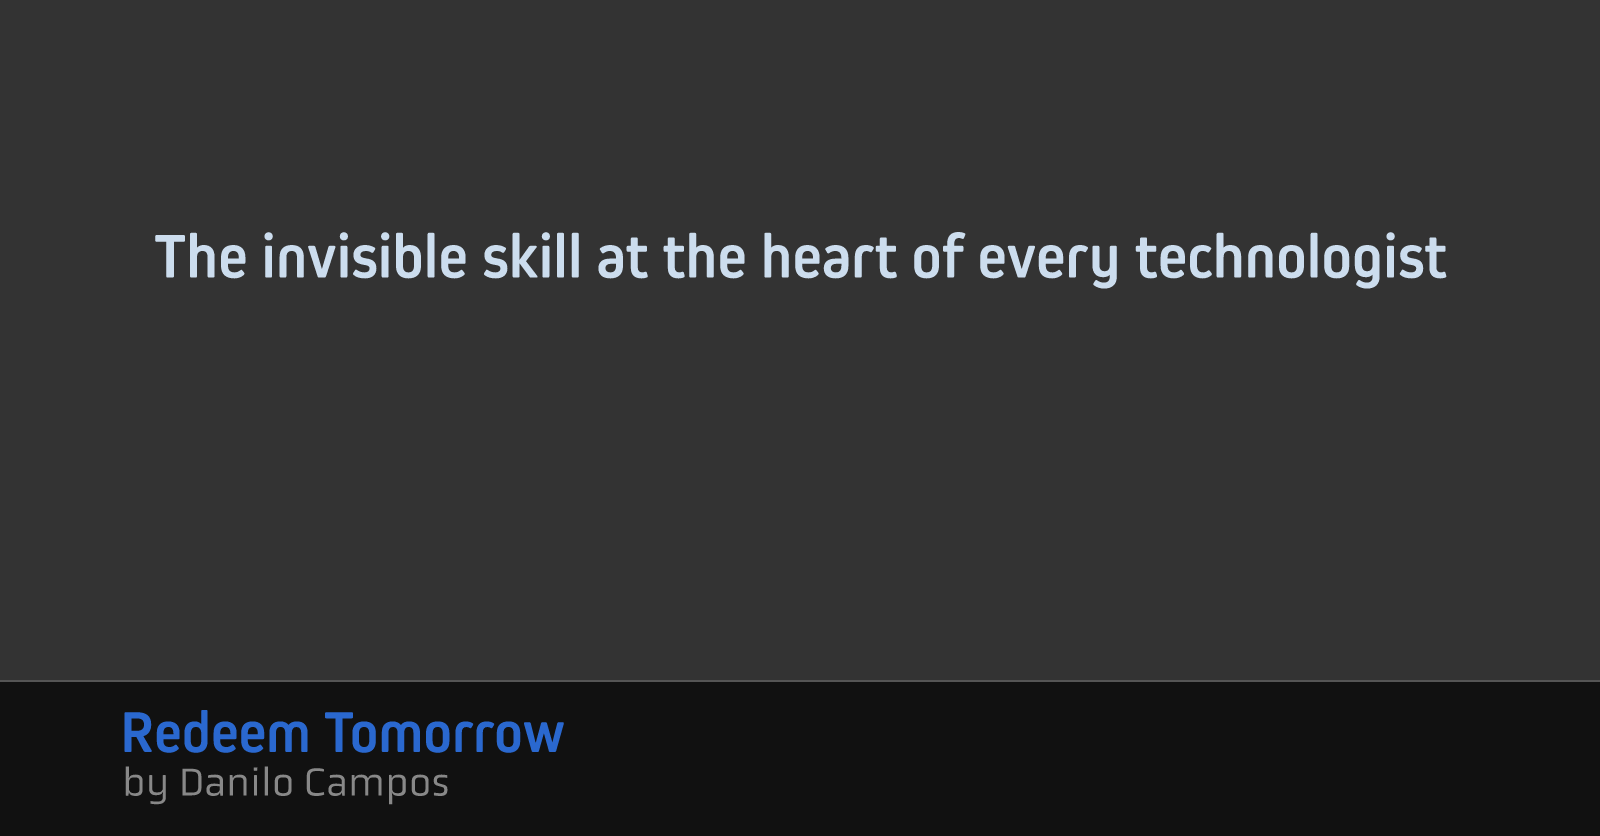 The invisible skill at the heart of every technologist